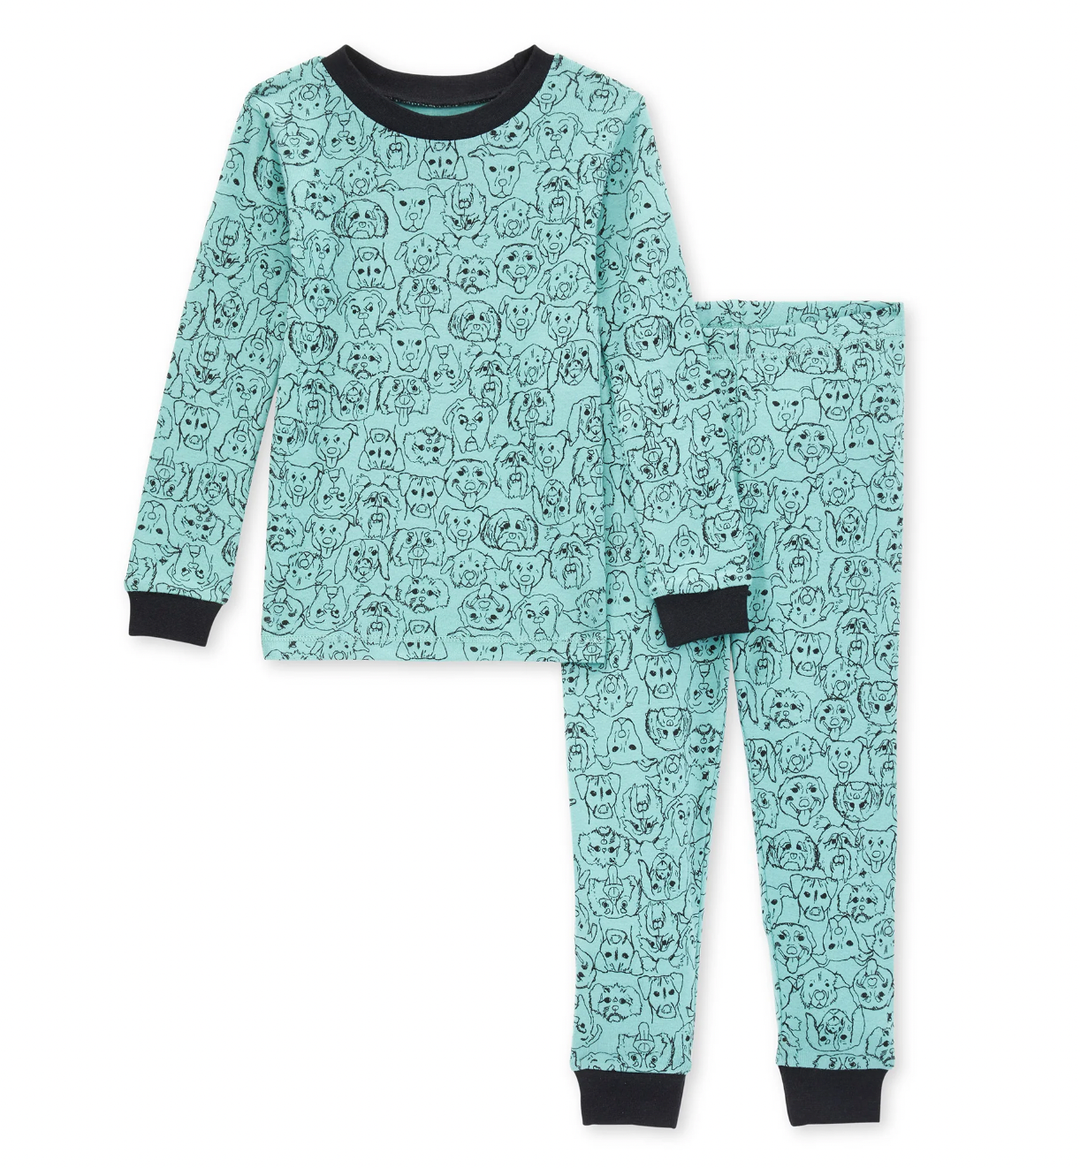 Burt's Bees - Dogs Two-Piece Pajamas in Teal